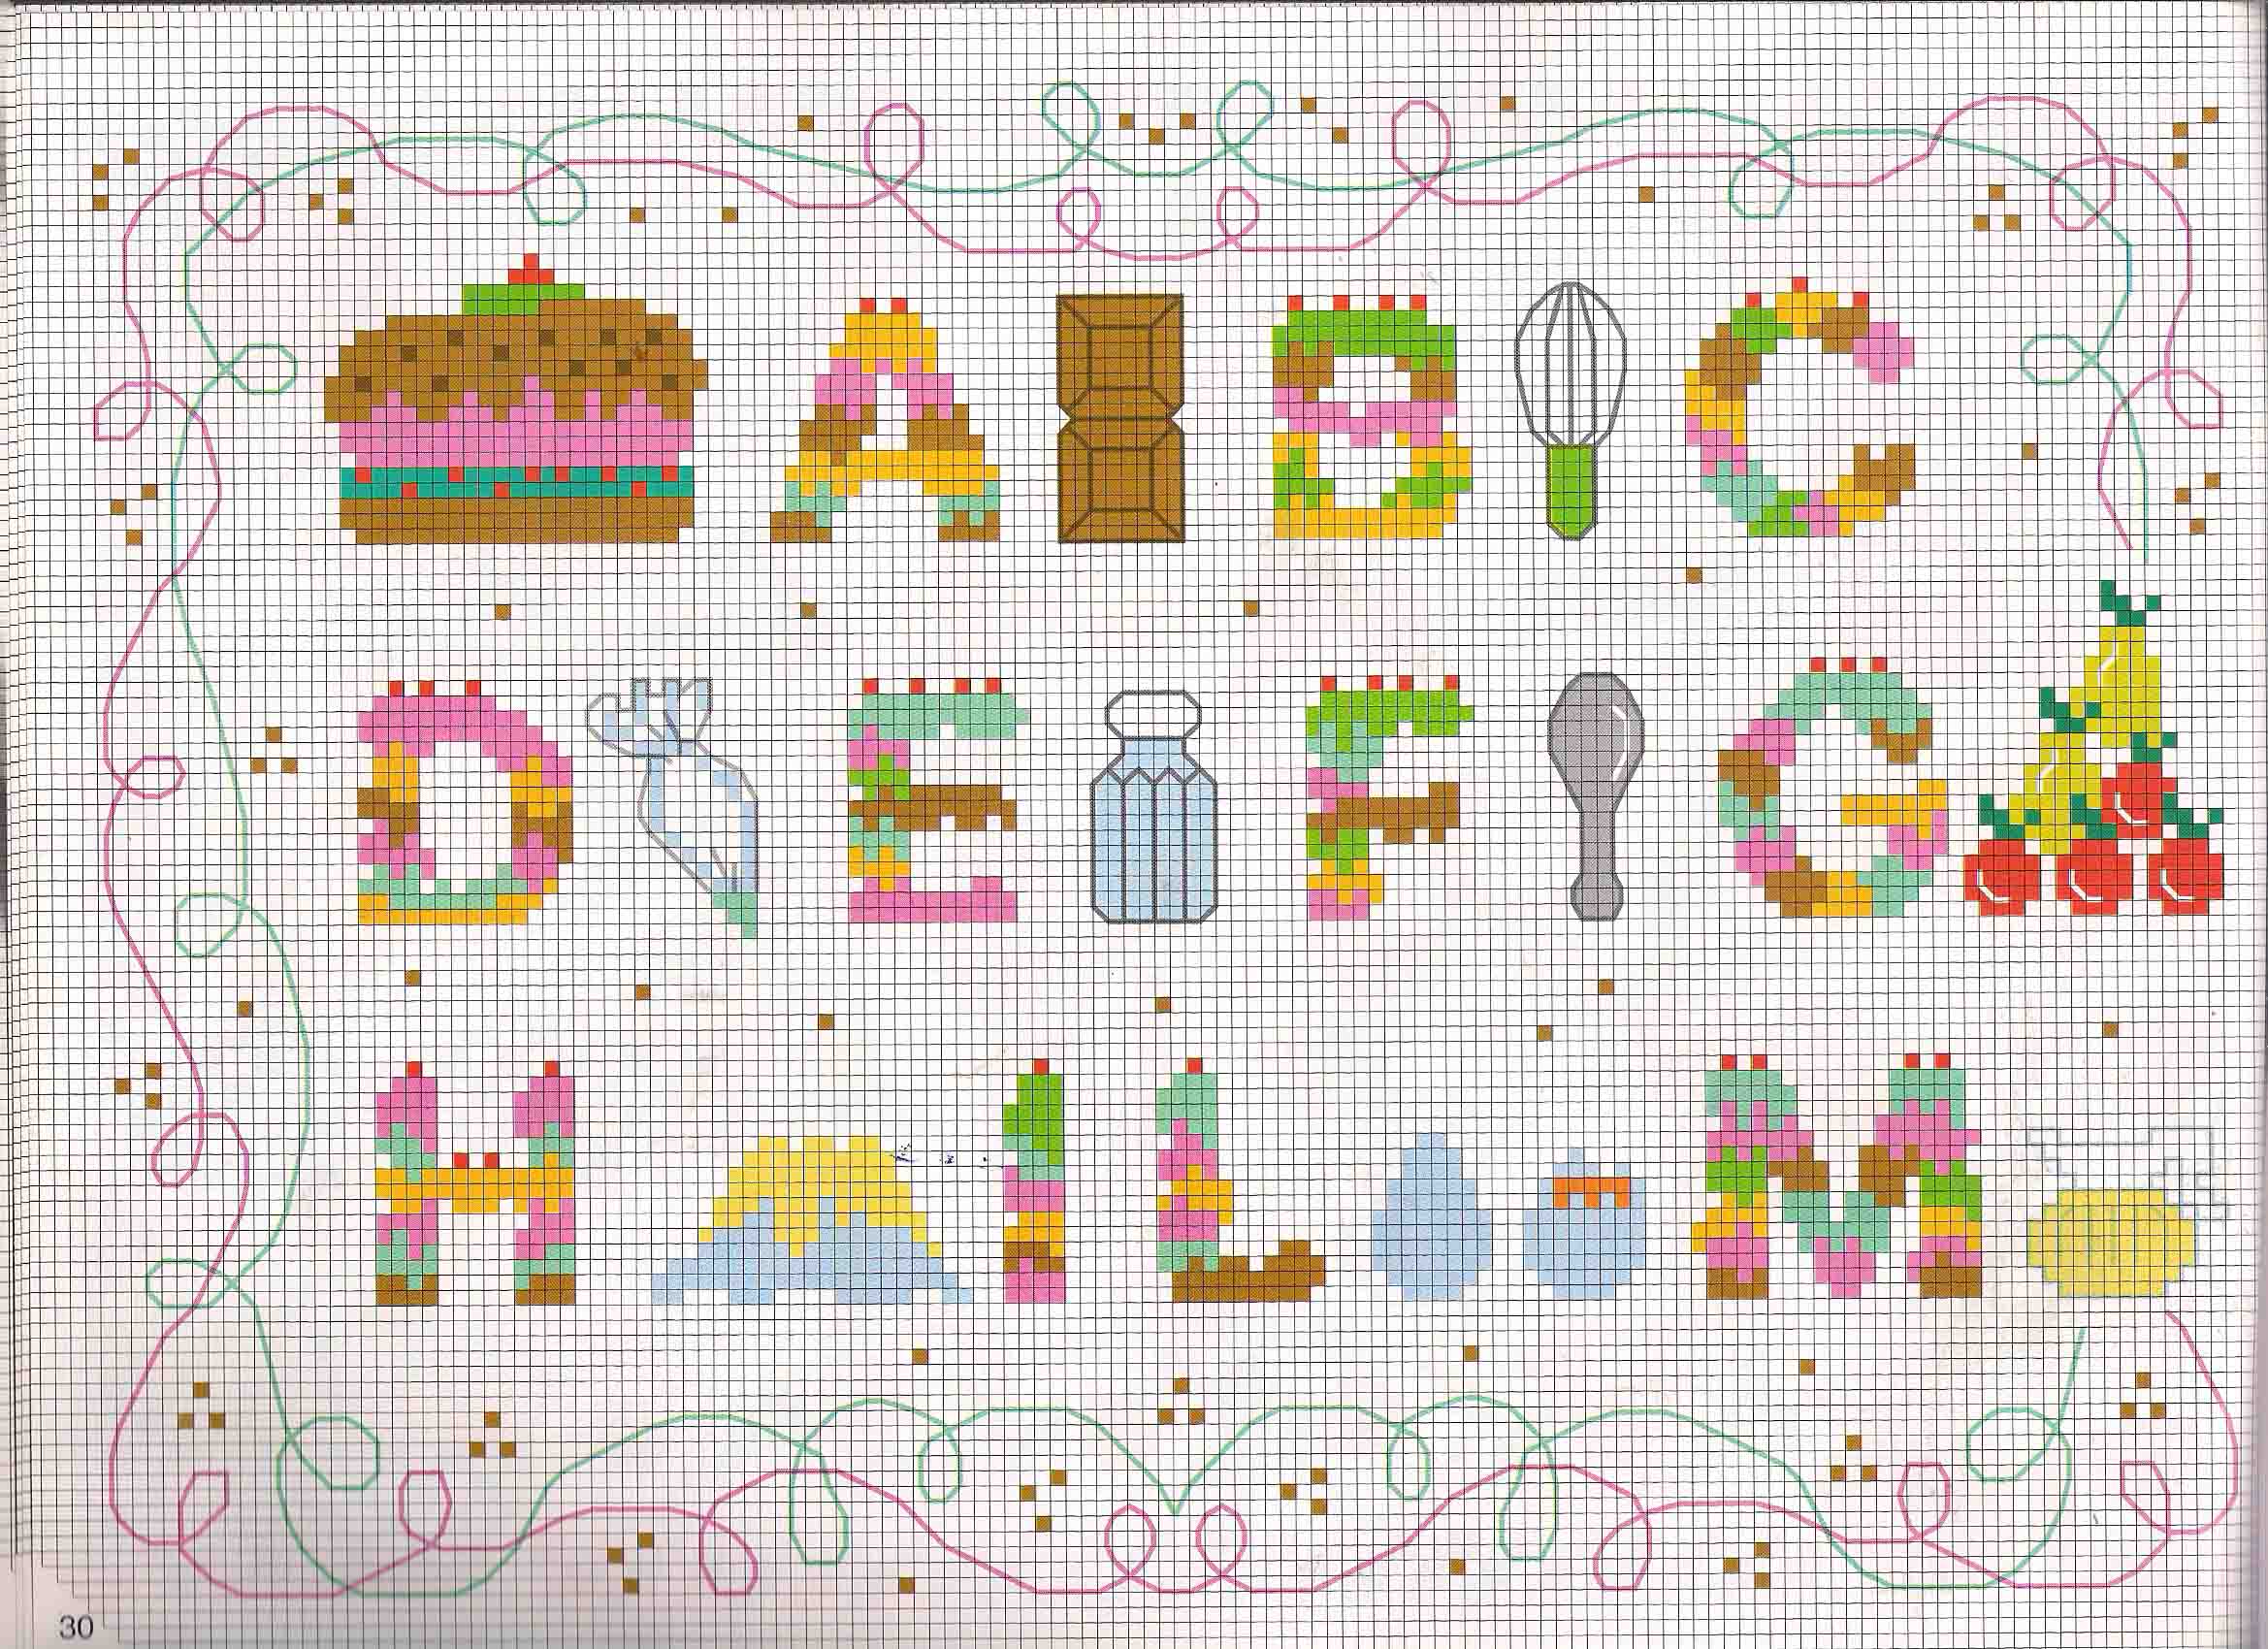 Cross stitch alphabet with cakes and pastries (1)